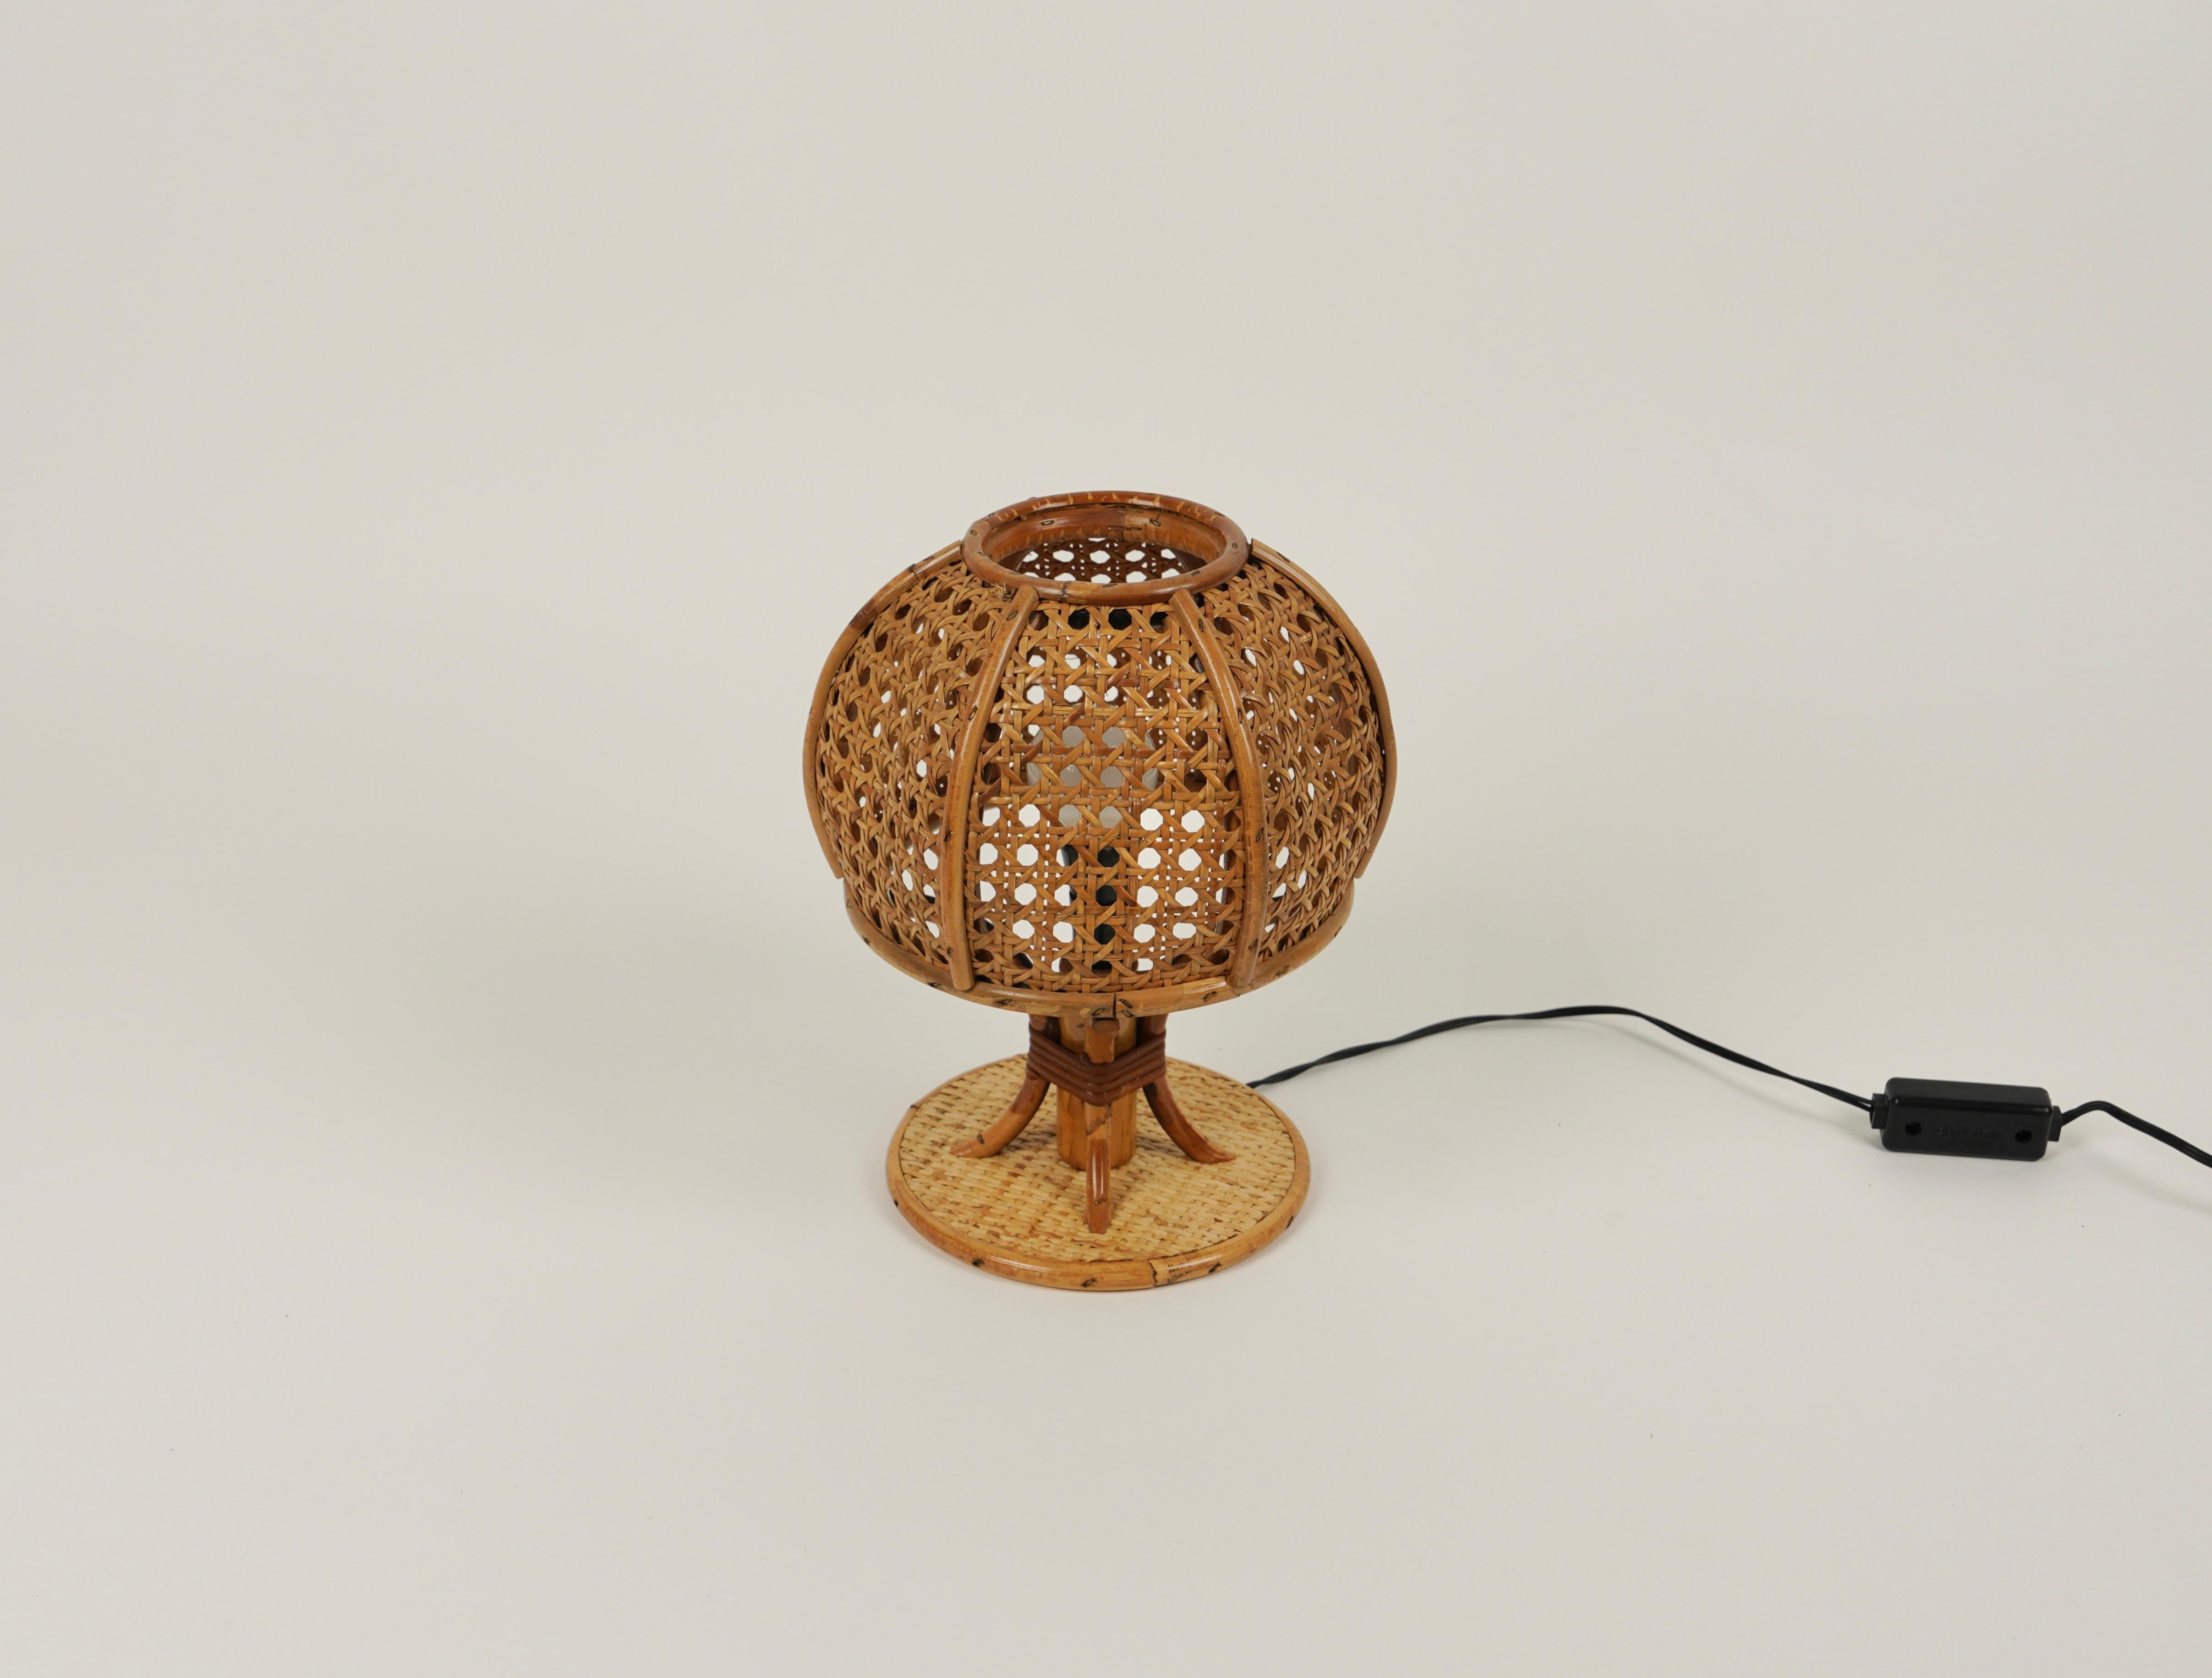 Italian Midcentury Rattan and Wicker Table Lamp Louis Sognot Style, Italy, circa 1970s For Sale